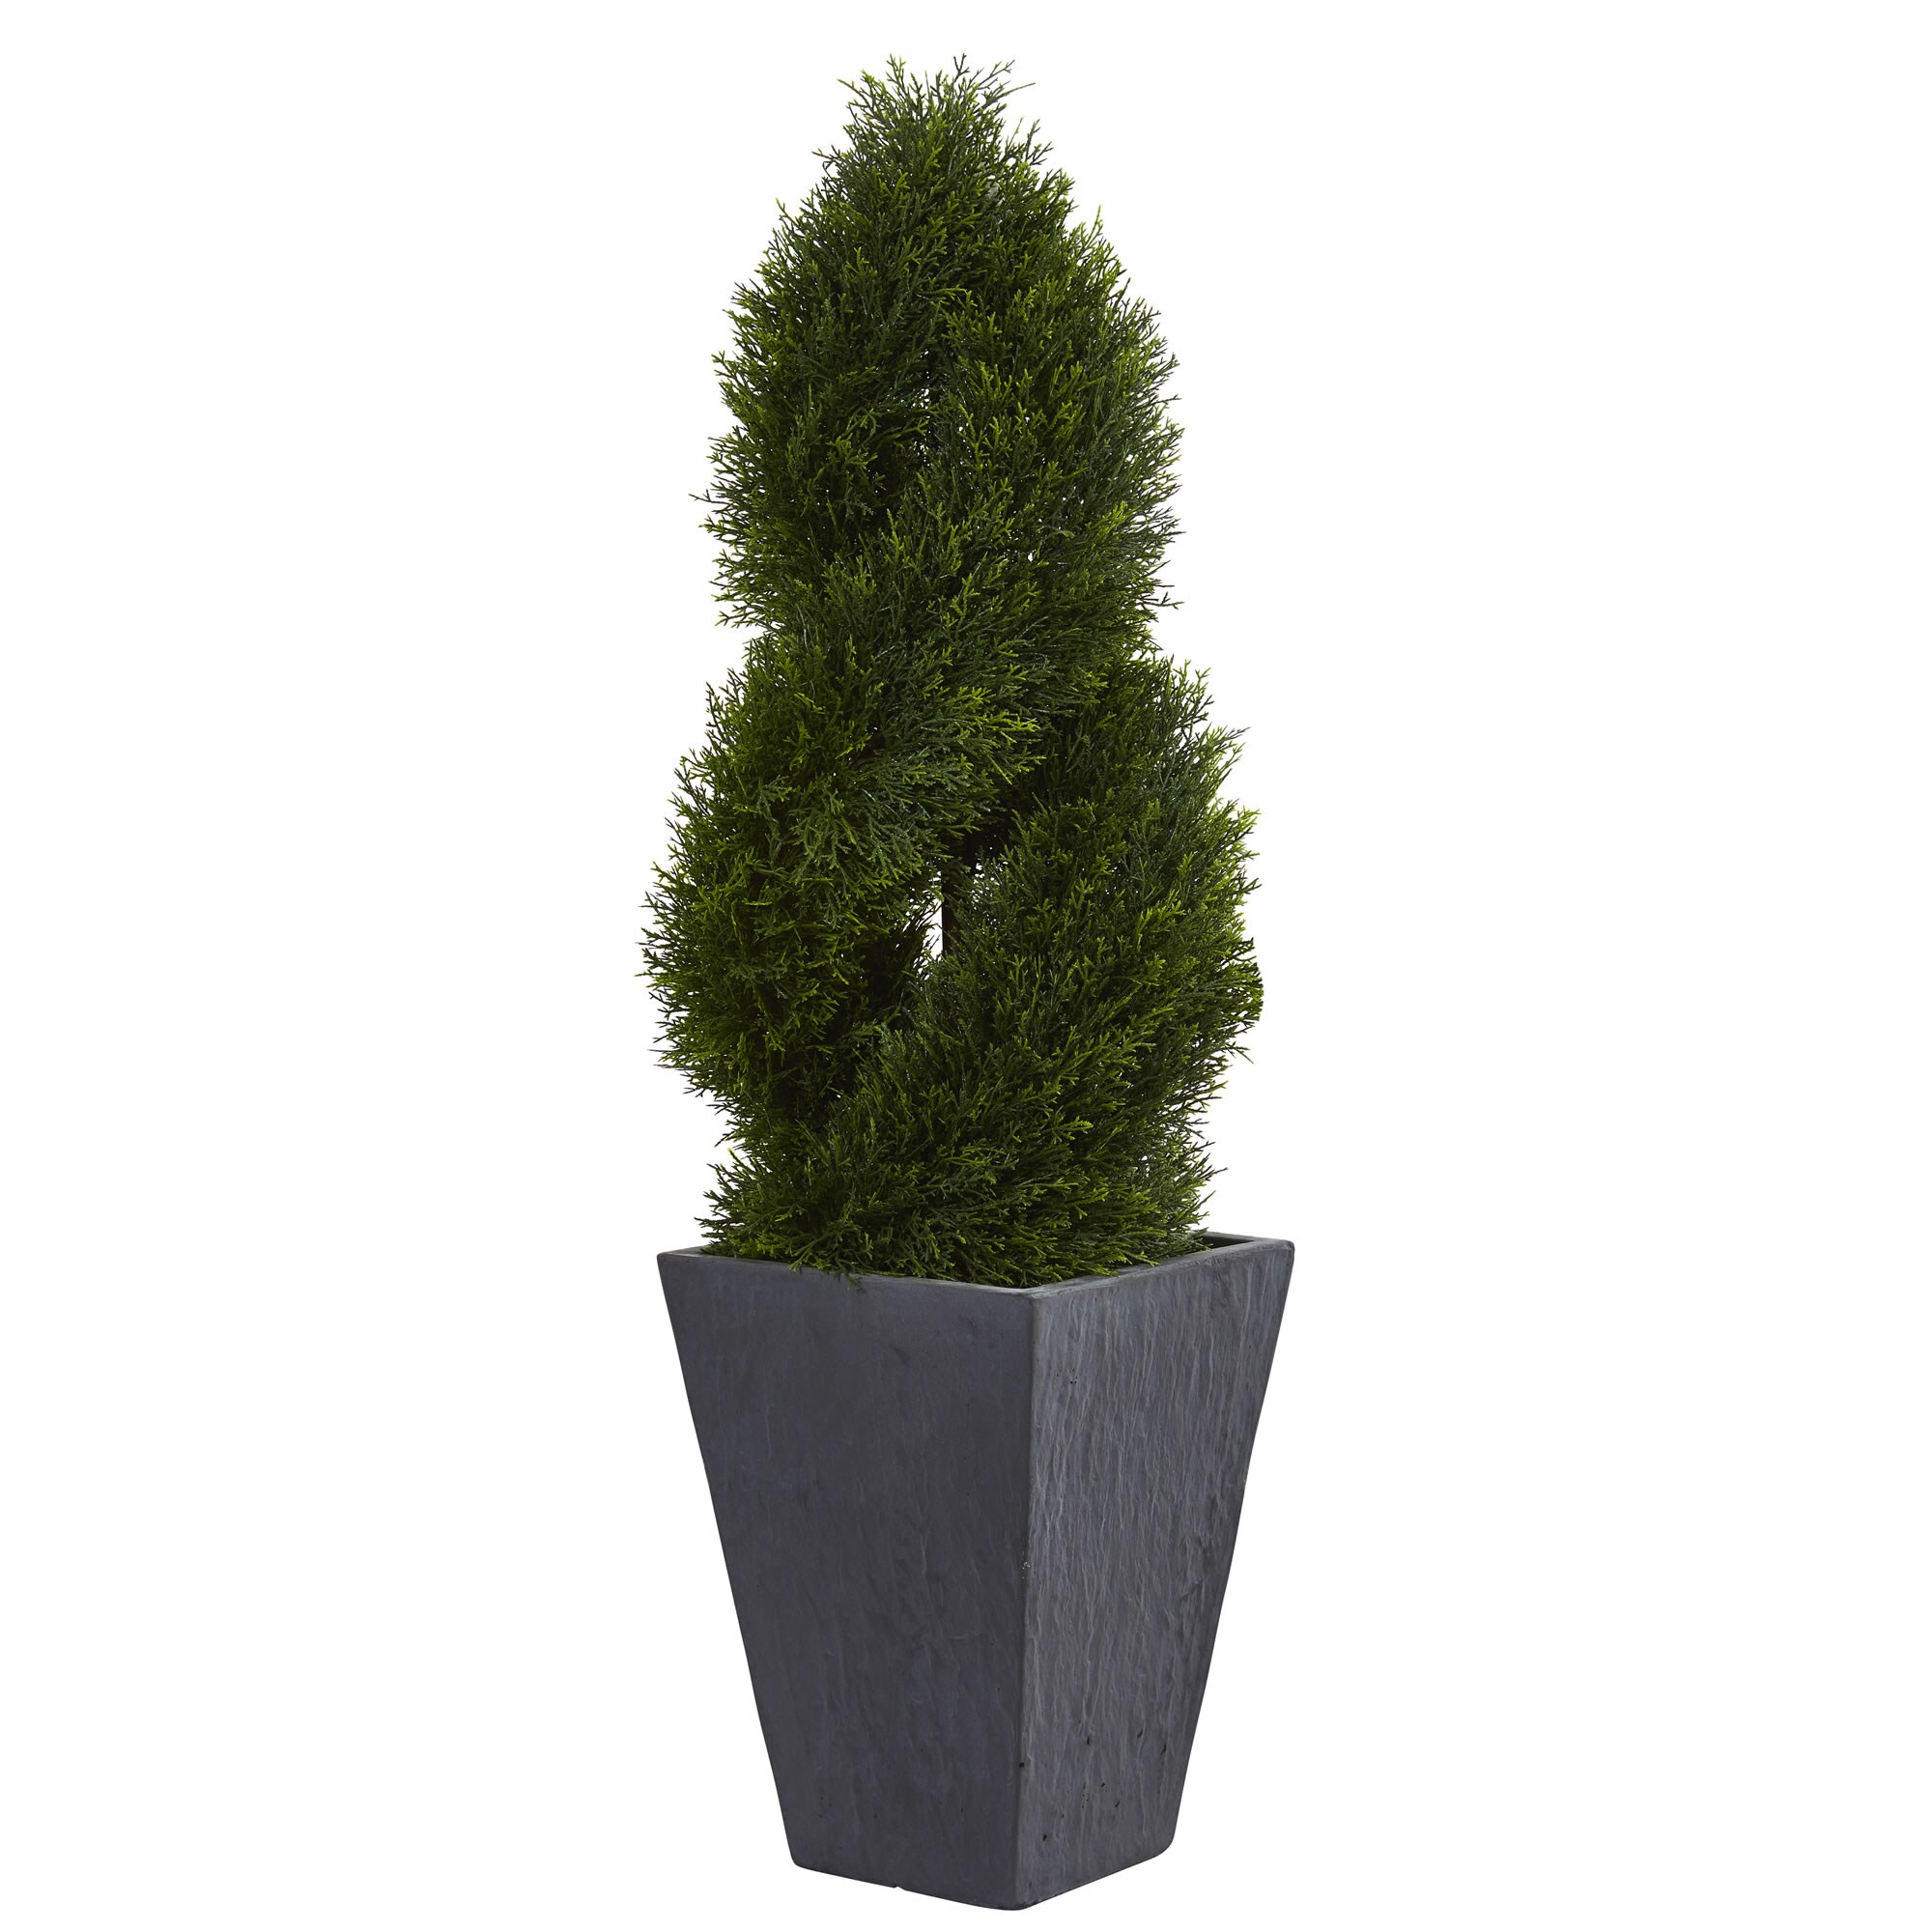 2 cypress Topiary 6' 4" Artificial Tree In/ Outdoor 76" Cedar Spiral Plant Fake 